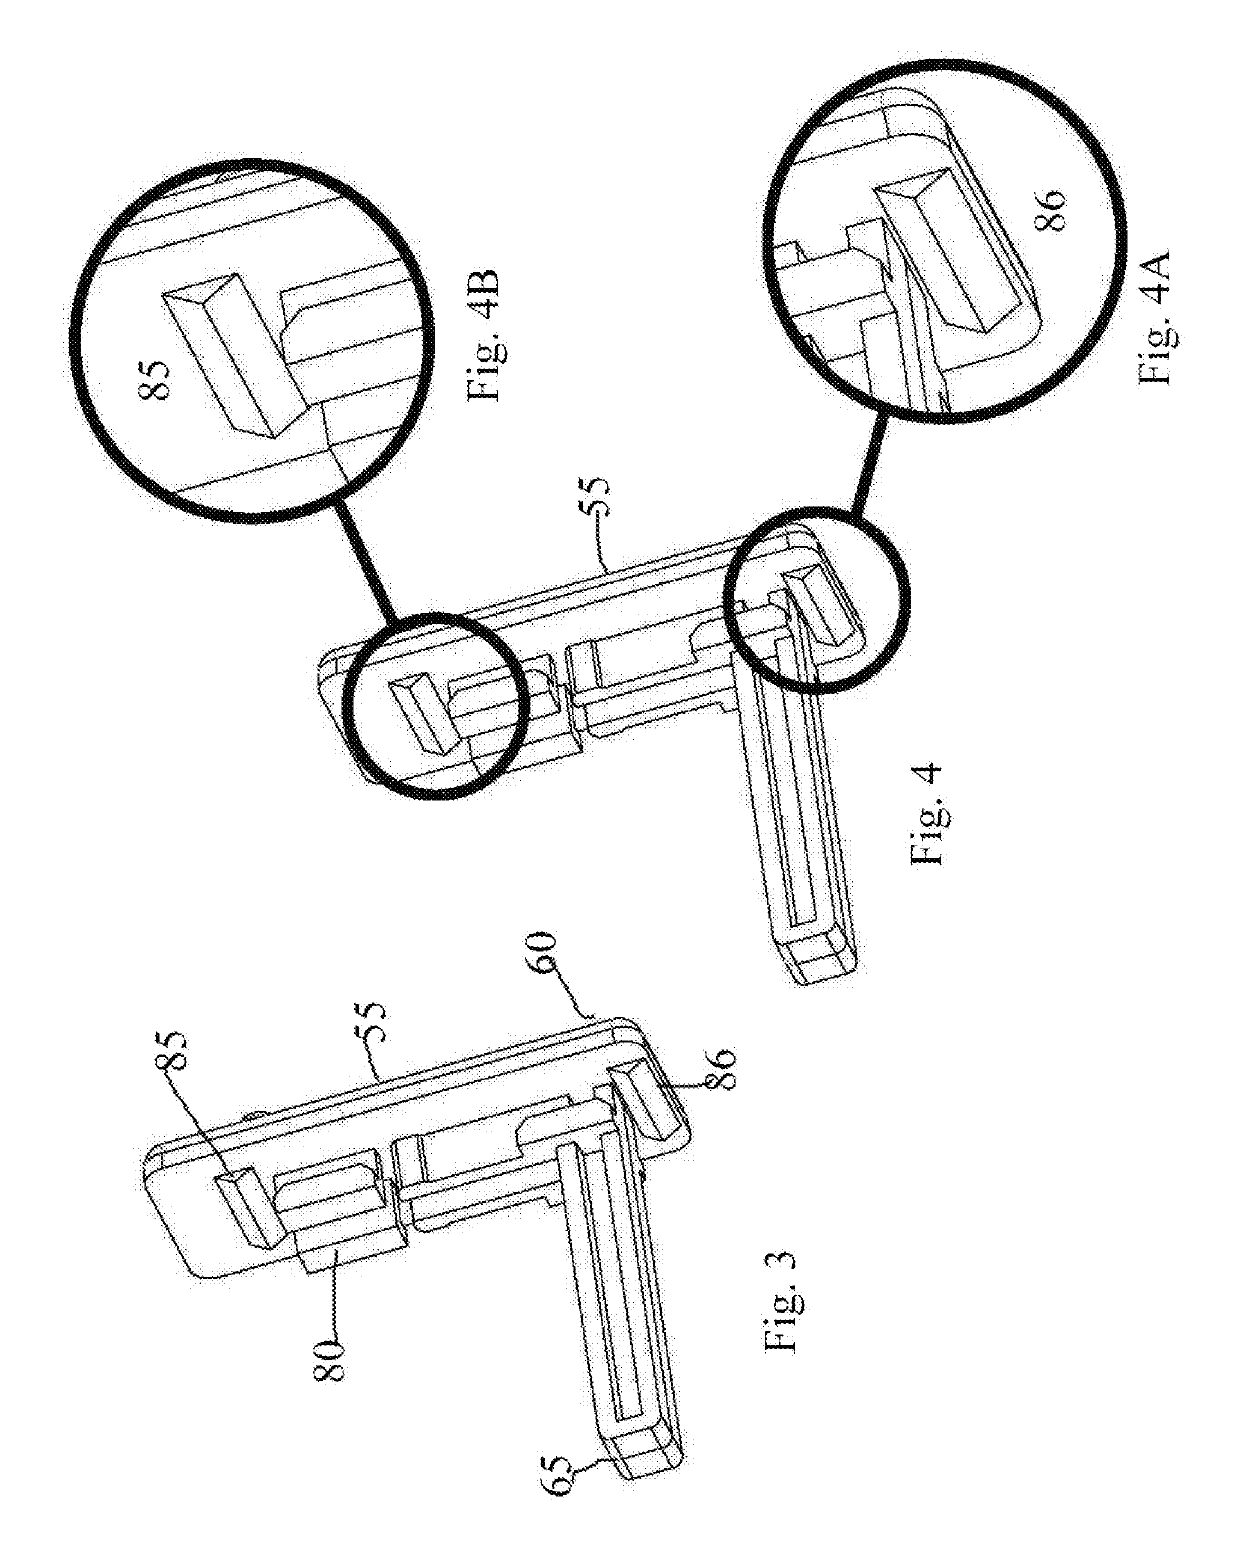 Improvement for Apparatus for Holding and Dispensing Cosmetics